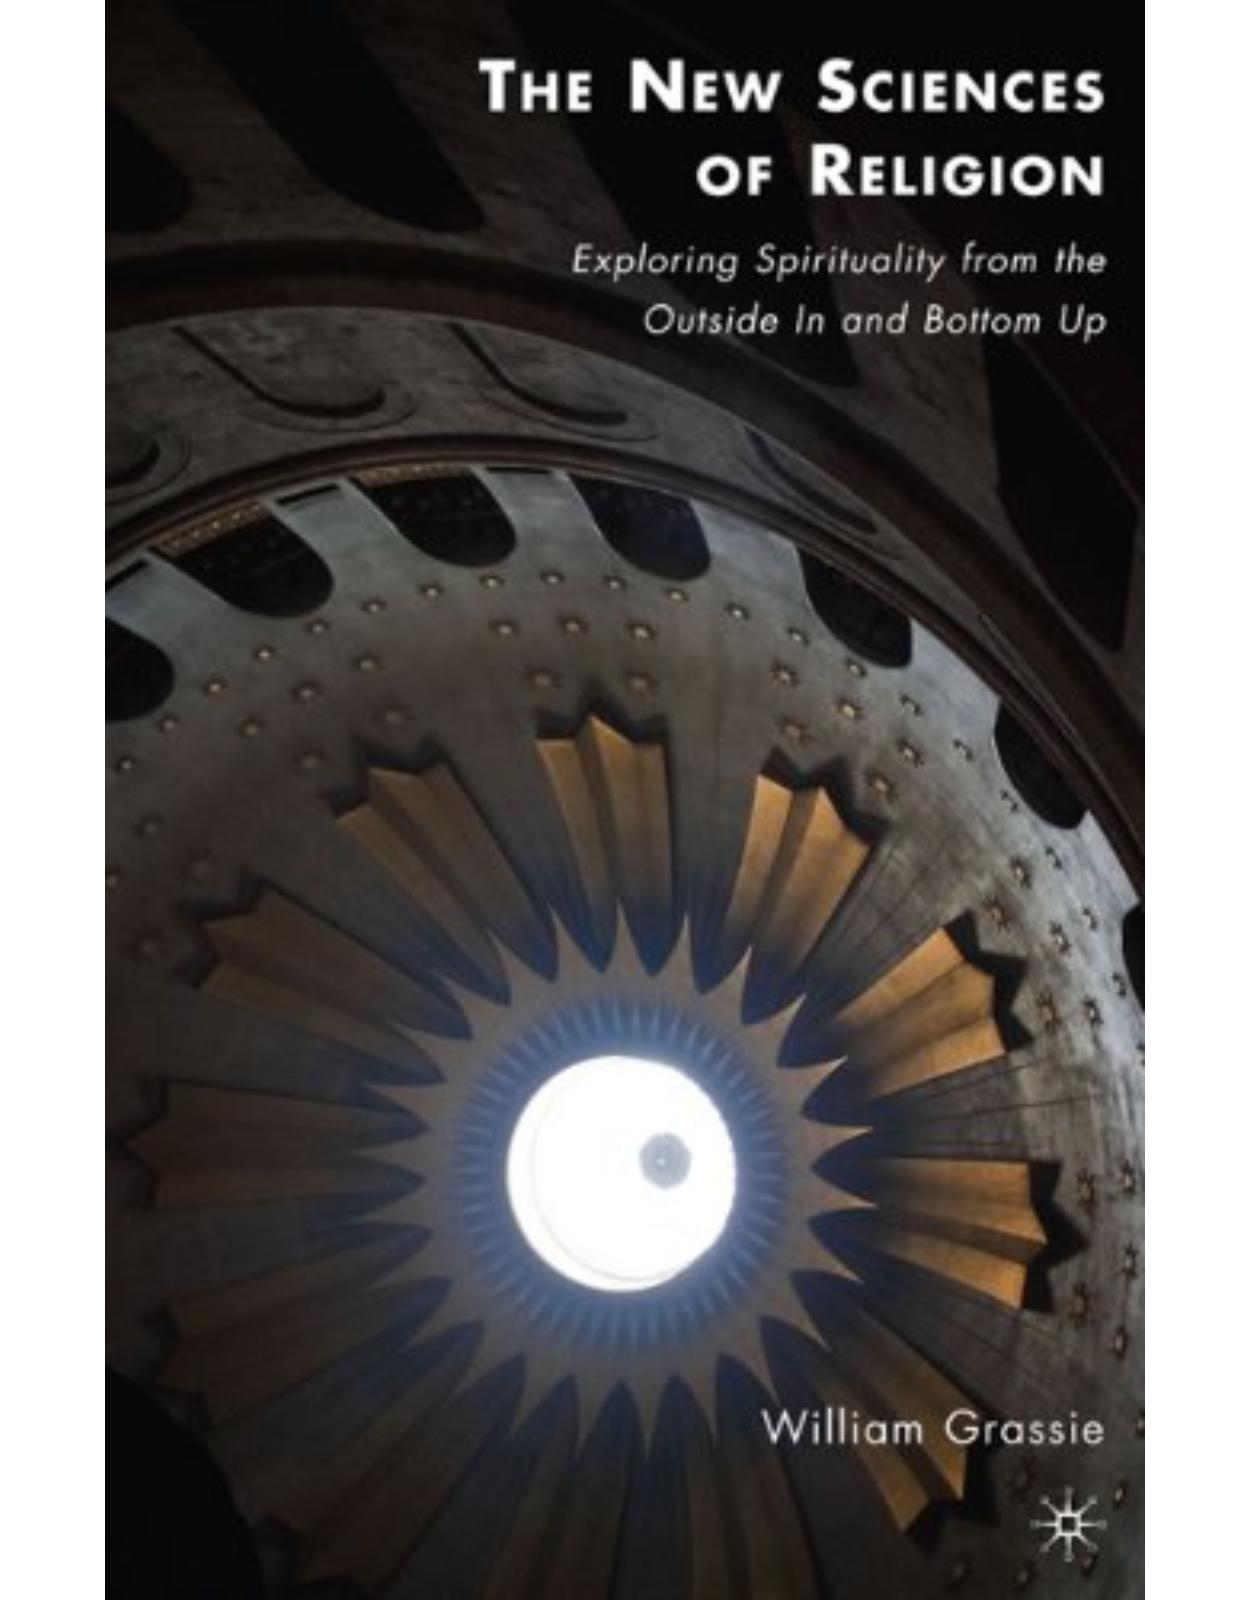 The New Sciences of Religion: Exploring Spirituality from the Outside In and Bottom Up